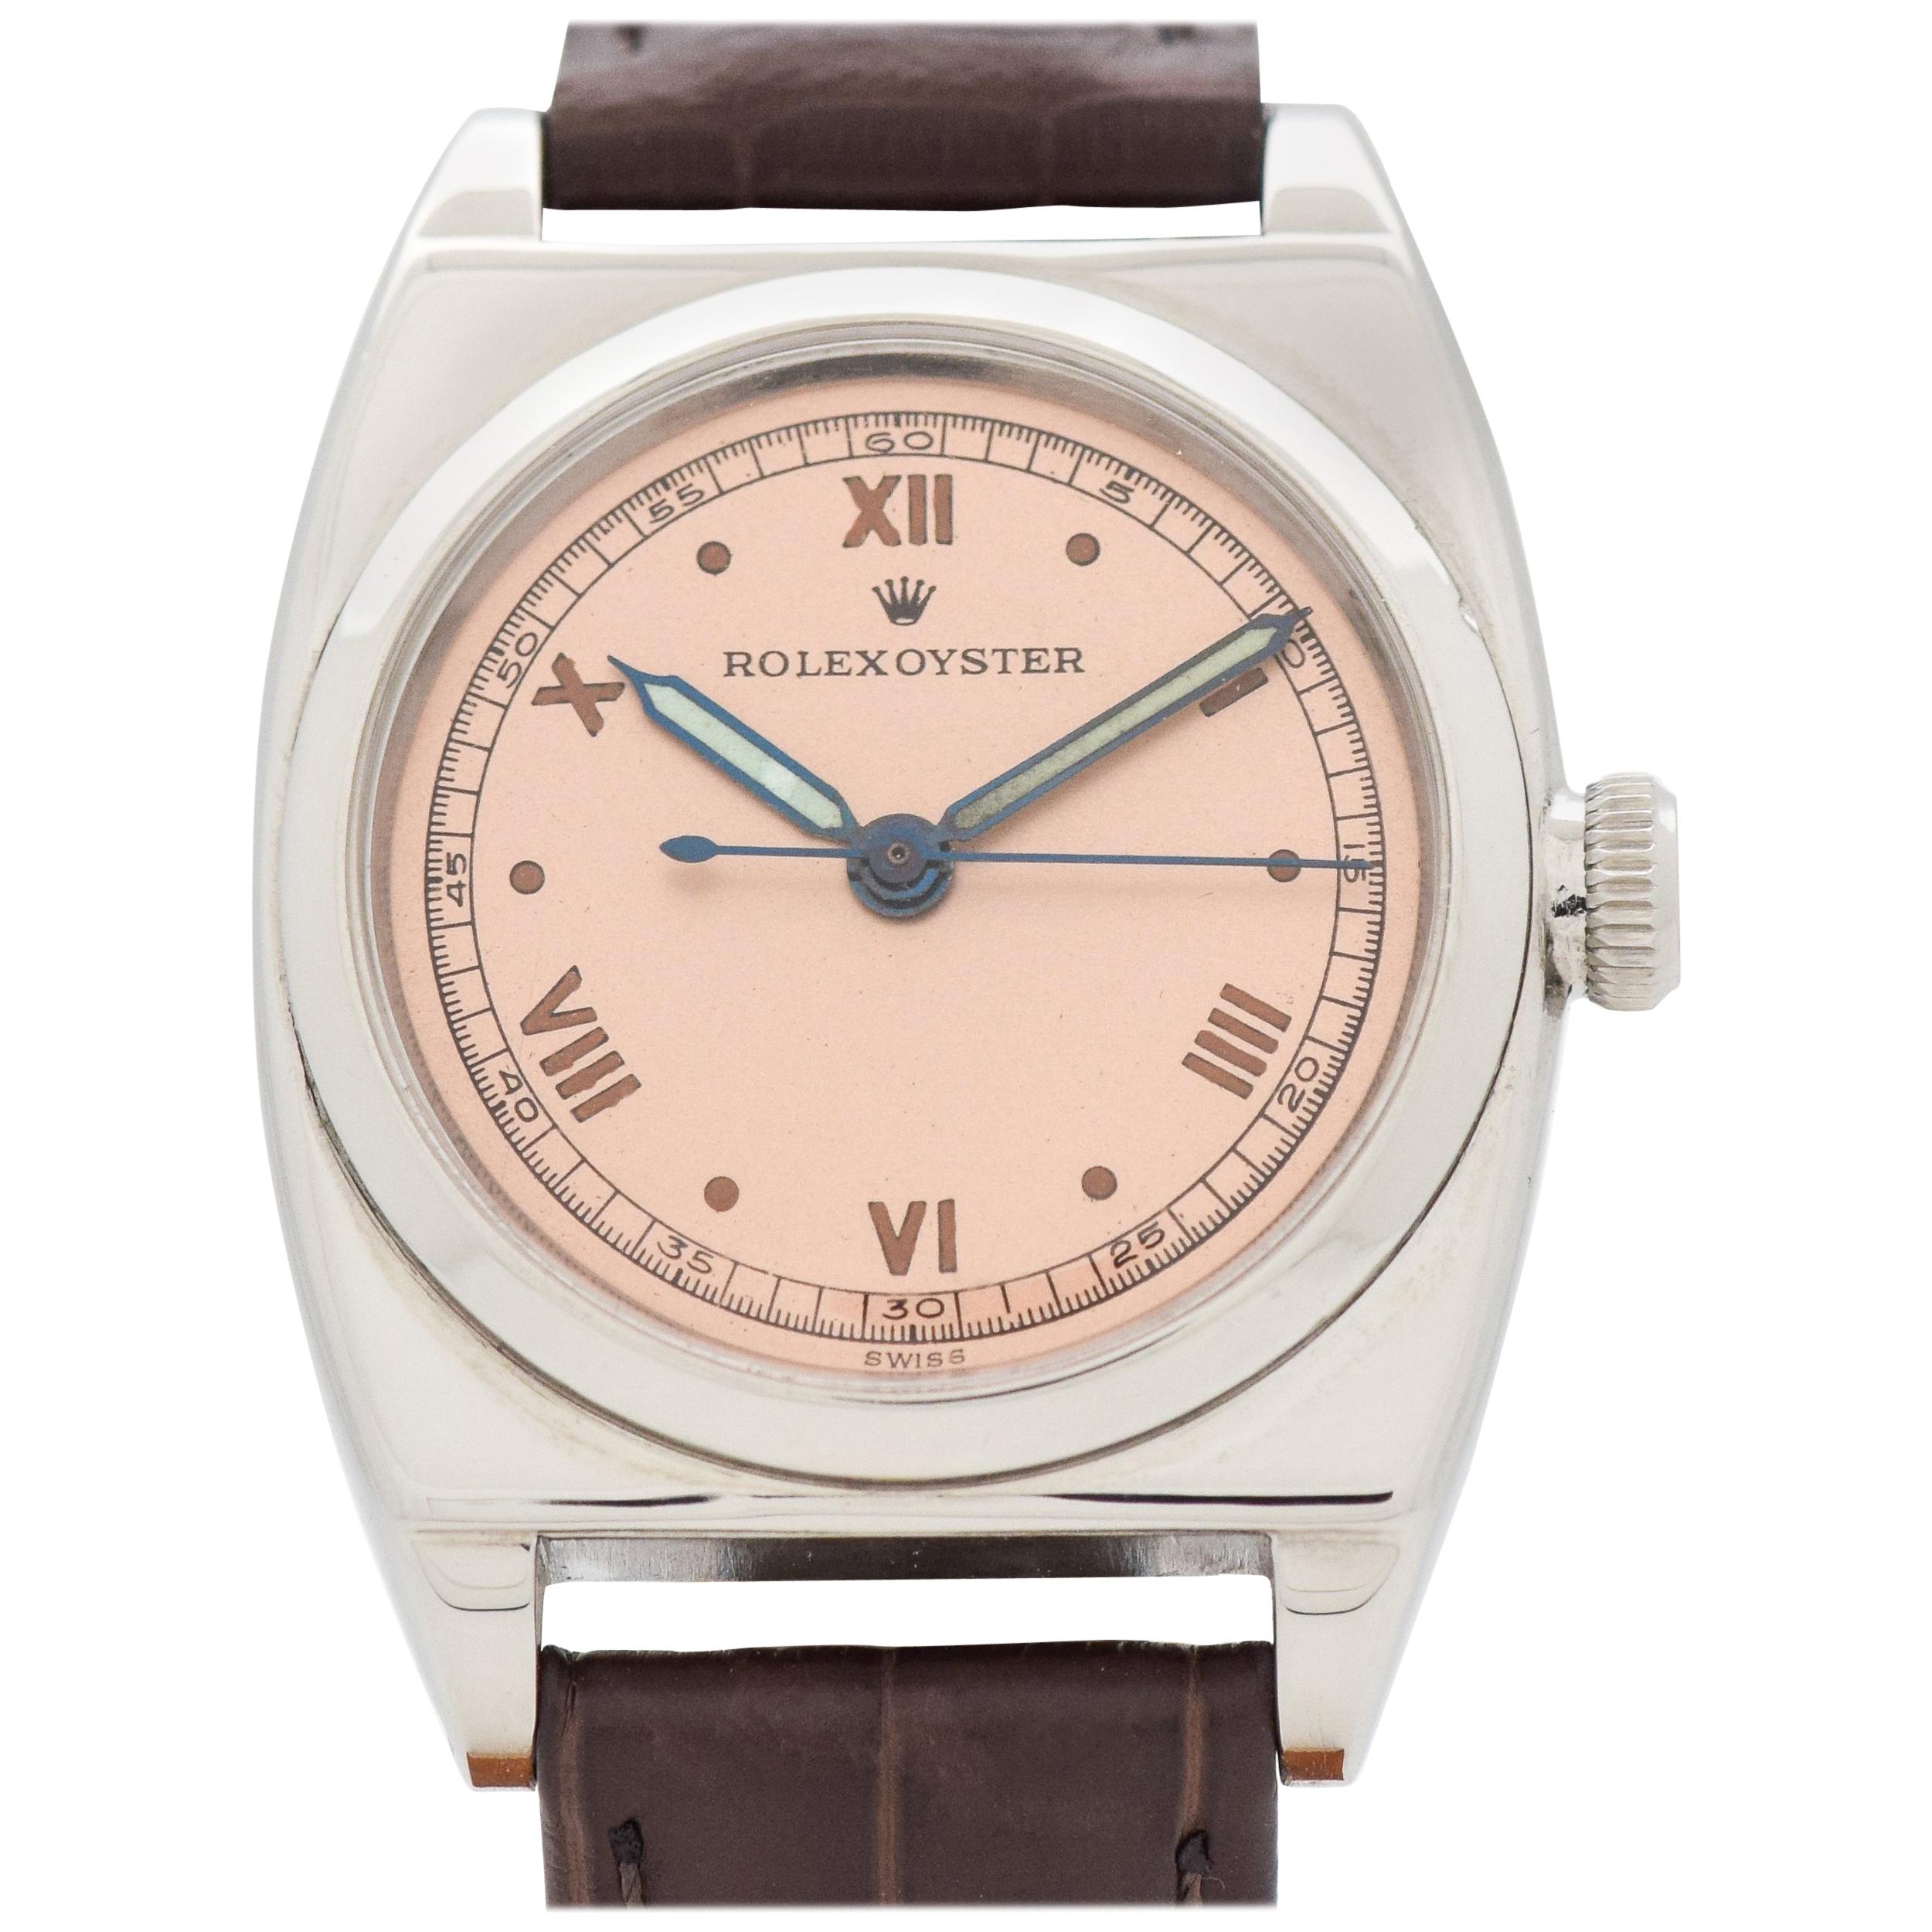 Vintage Rolex Viceroy Reference 3116 Watch, 1940